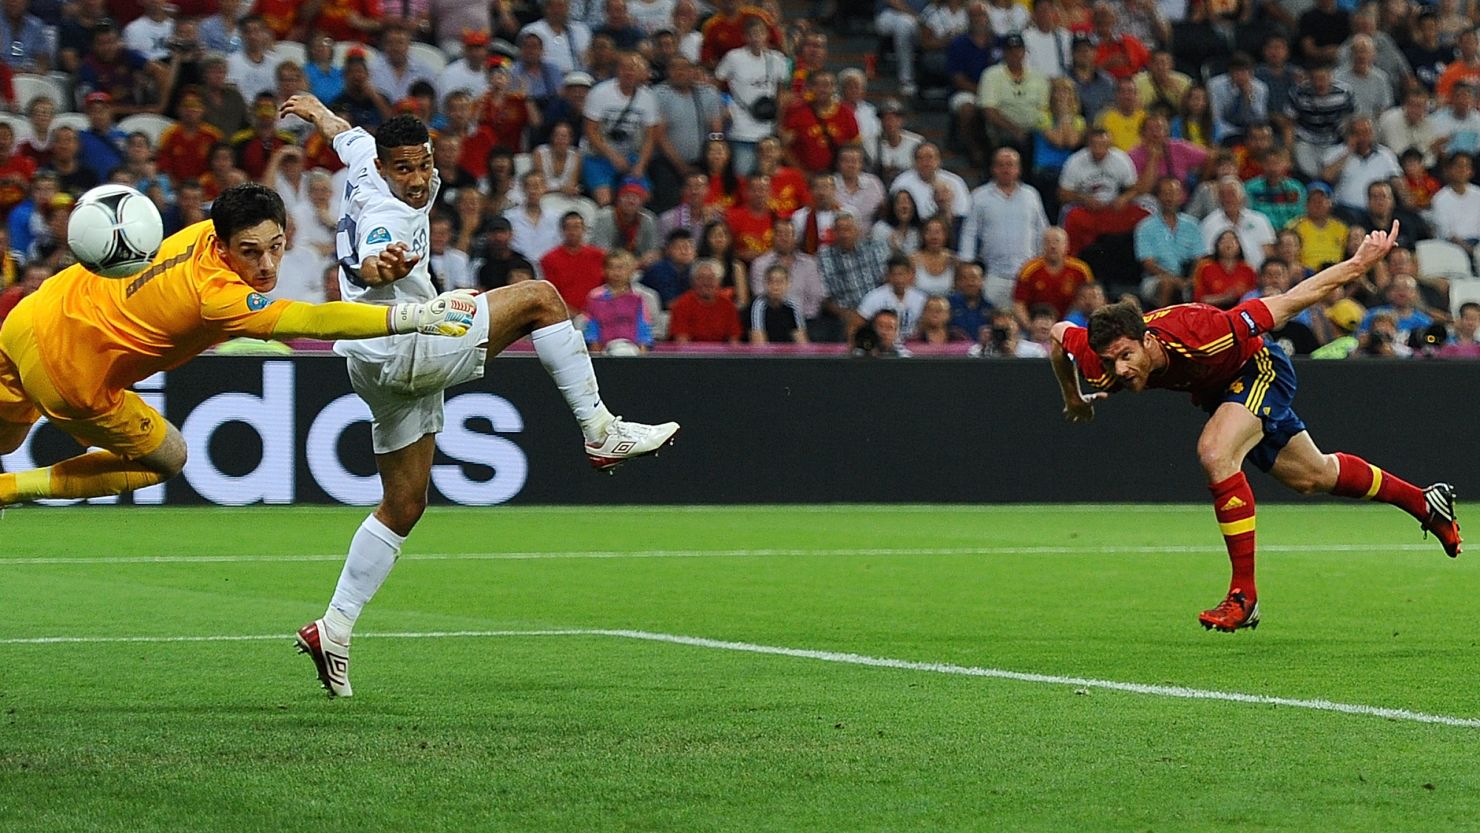 Xabi Alonso (right) heads past goalkeeper Hugo Lloris to open Spain's account in the quarterfinal against France on Saturday